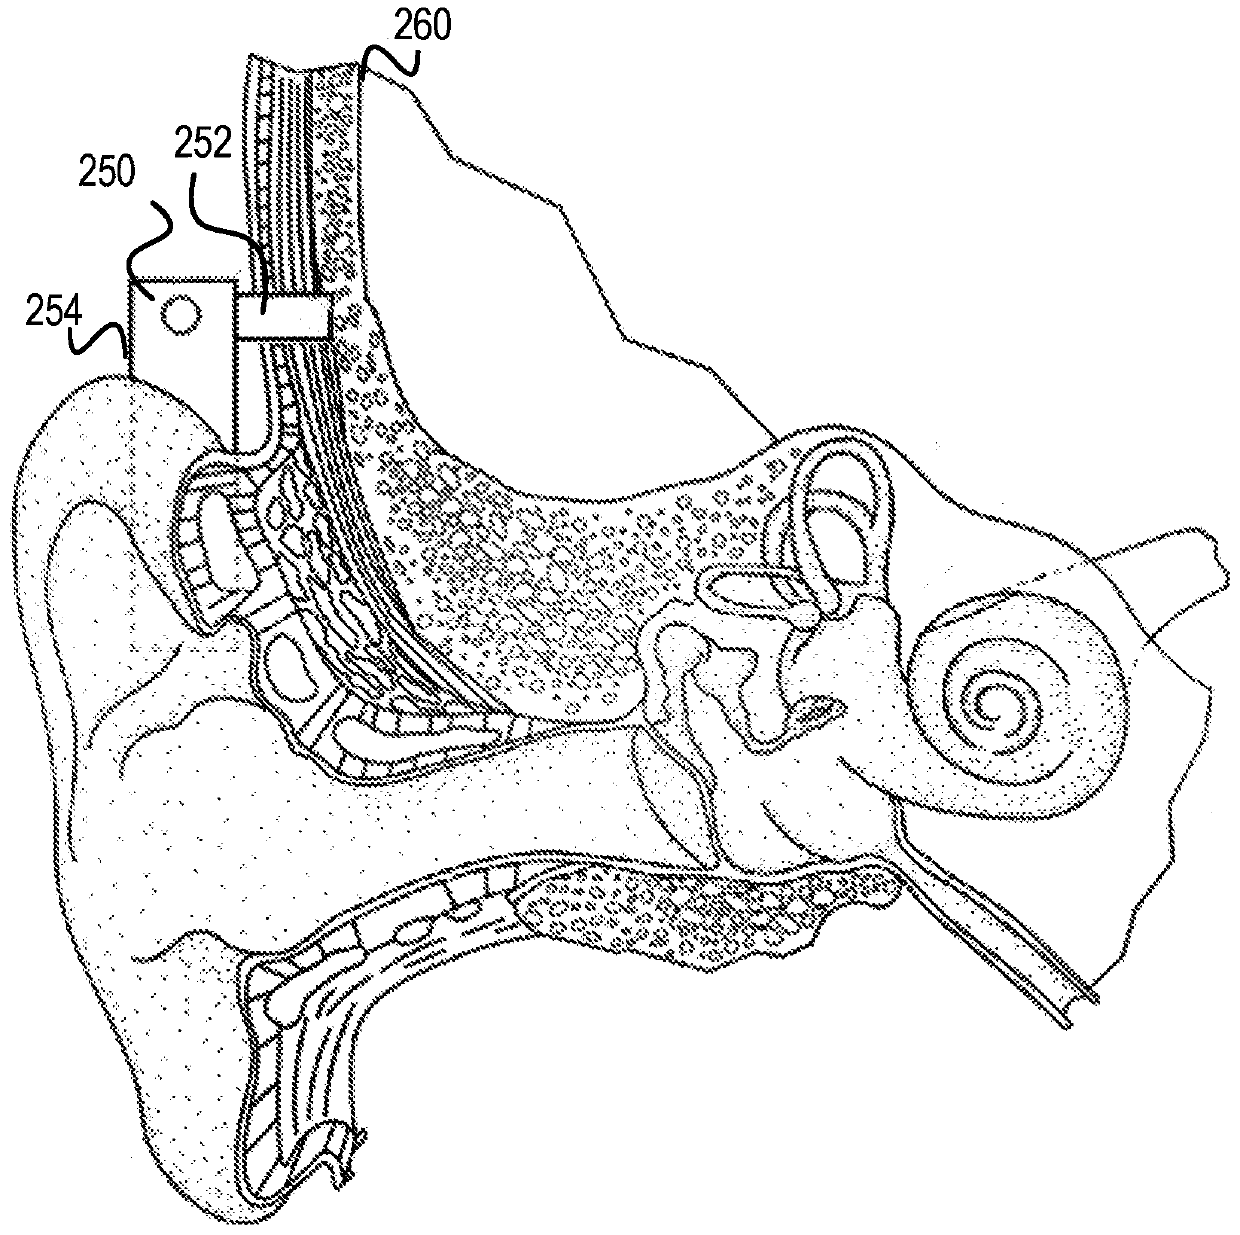 Fits bilateral hearing prosthesis systems